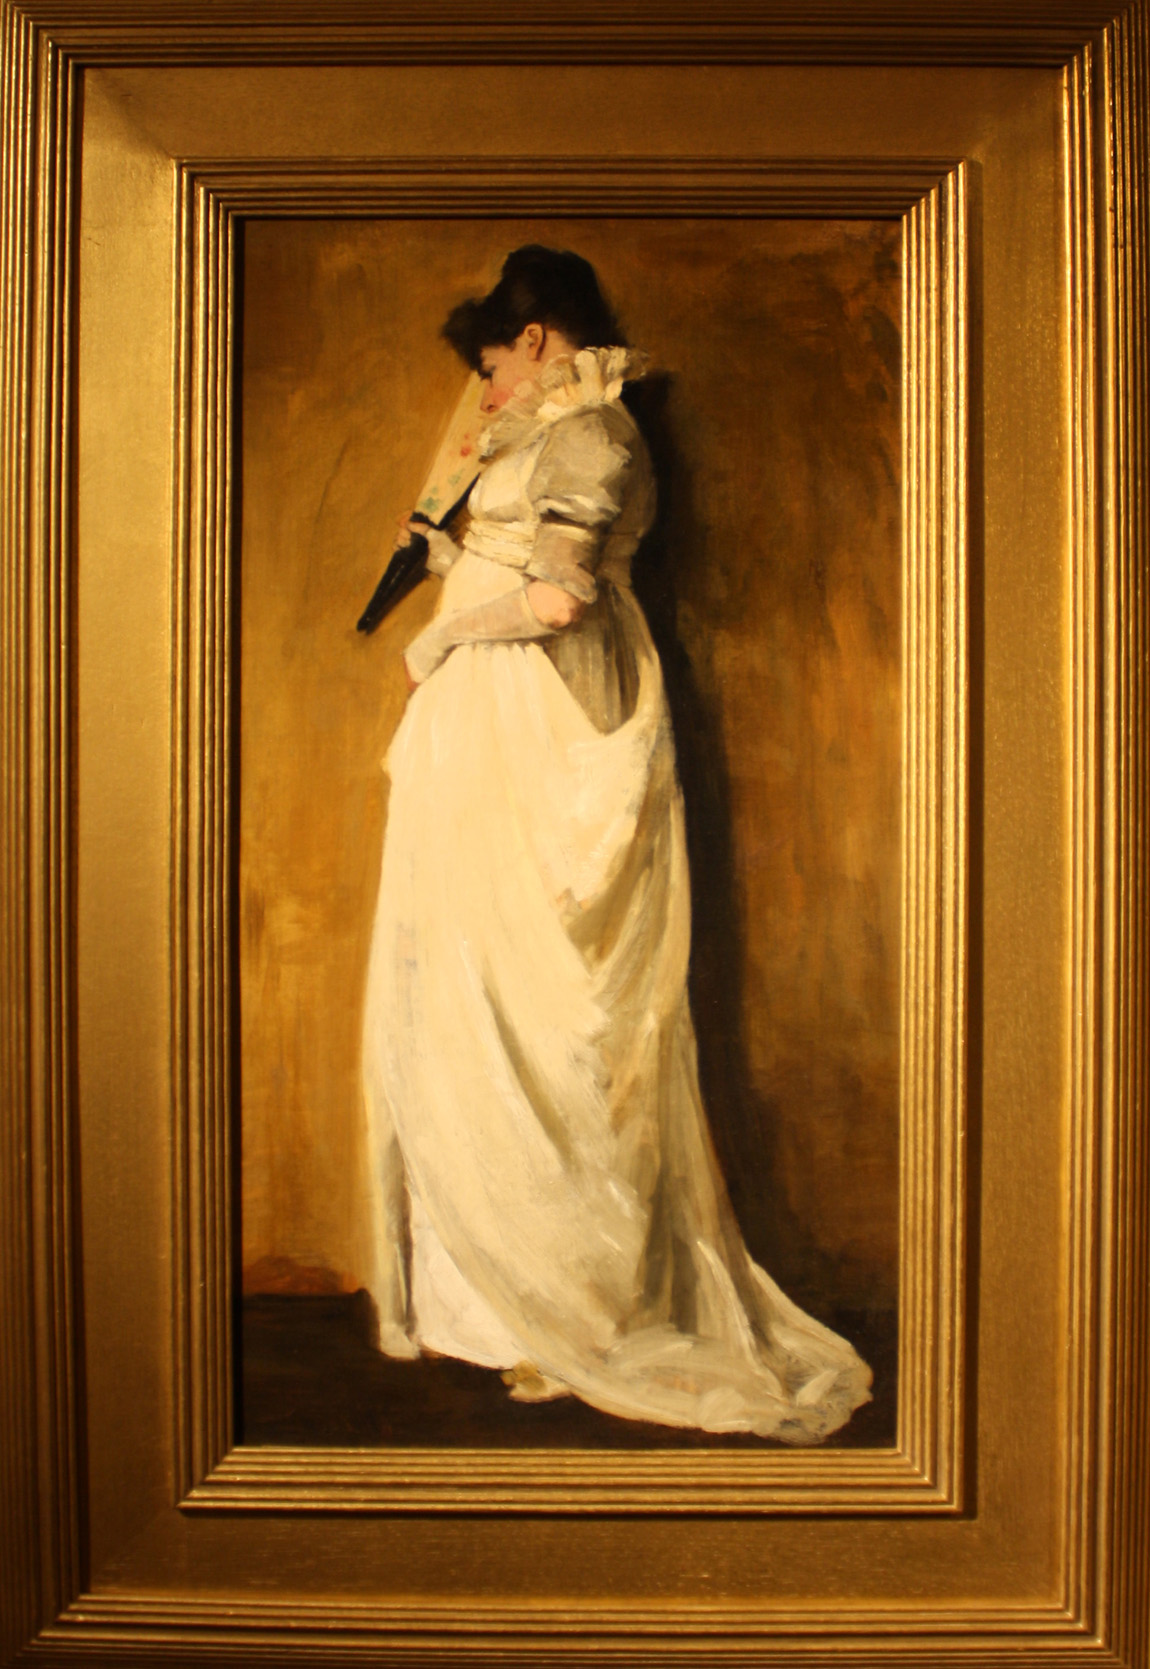 William Merritt Chase (1849–1916), “Woman in White Satin,” circa 1885, sold opening night at the booth of Thomas Colville Fine Art, Guilford, Conn., and New York City.